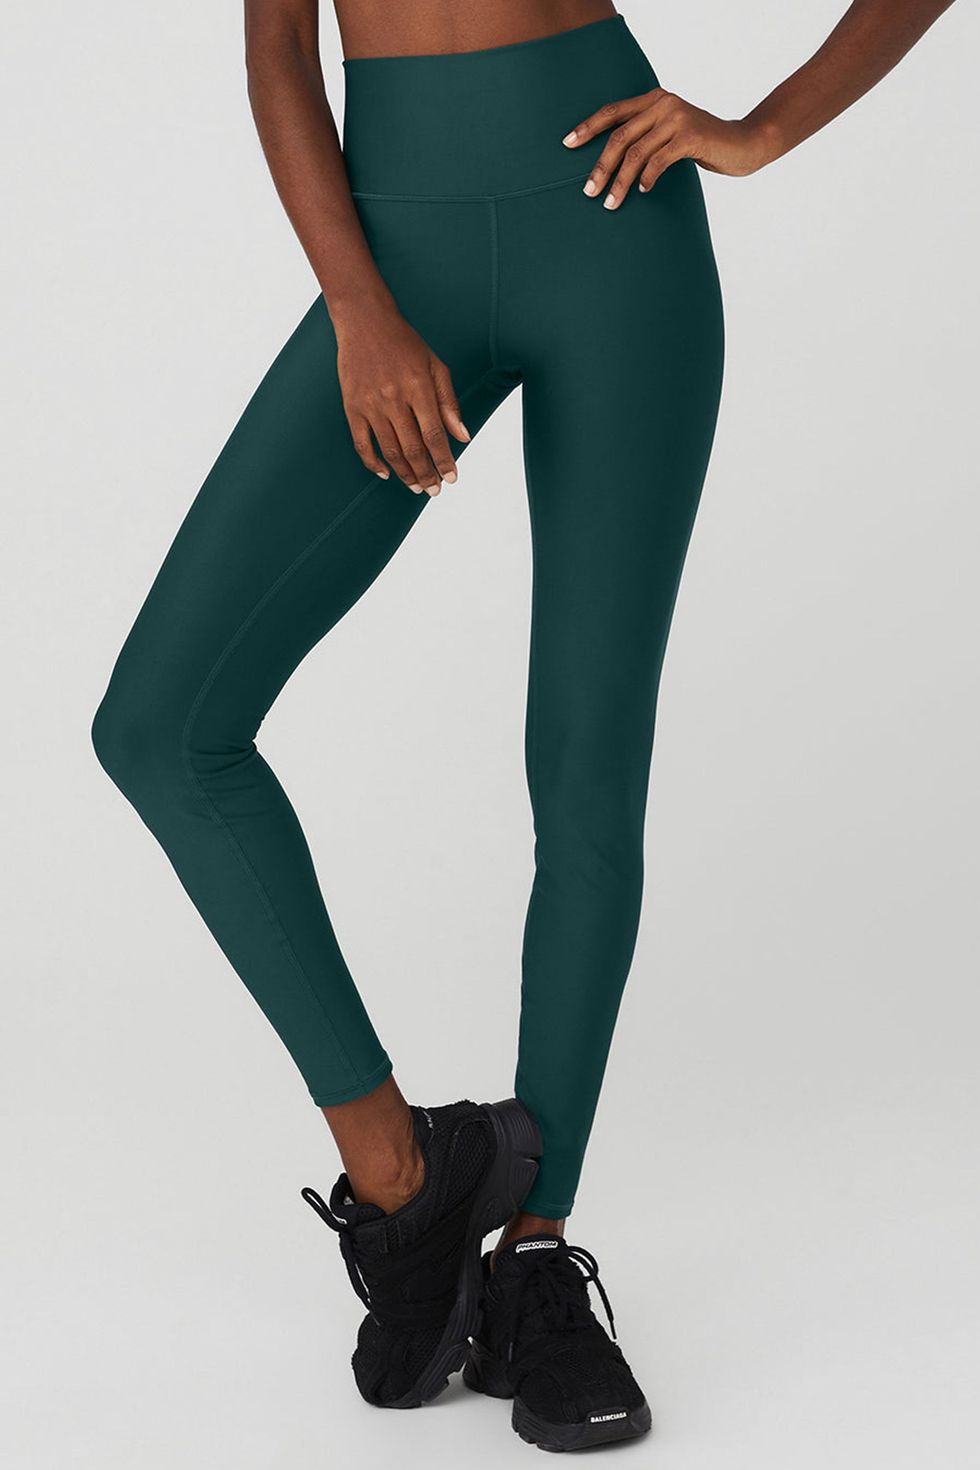 Did I Just Discover The BEST WORKOUT LEGGINGS?!